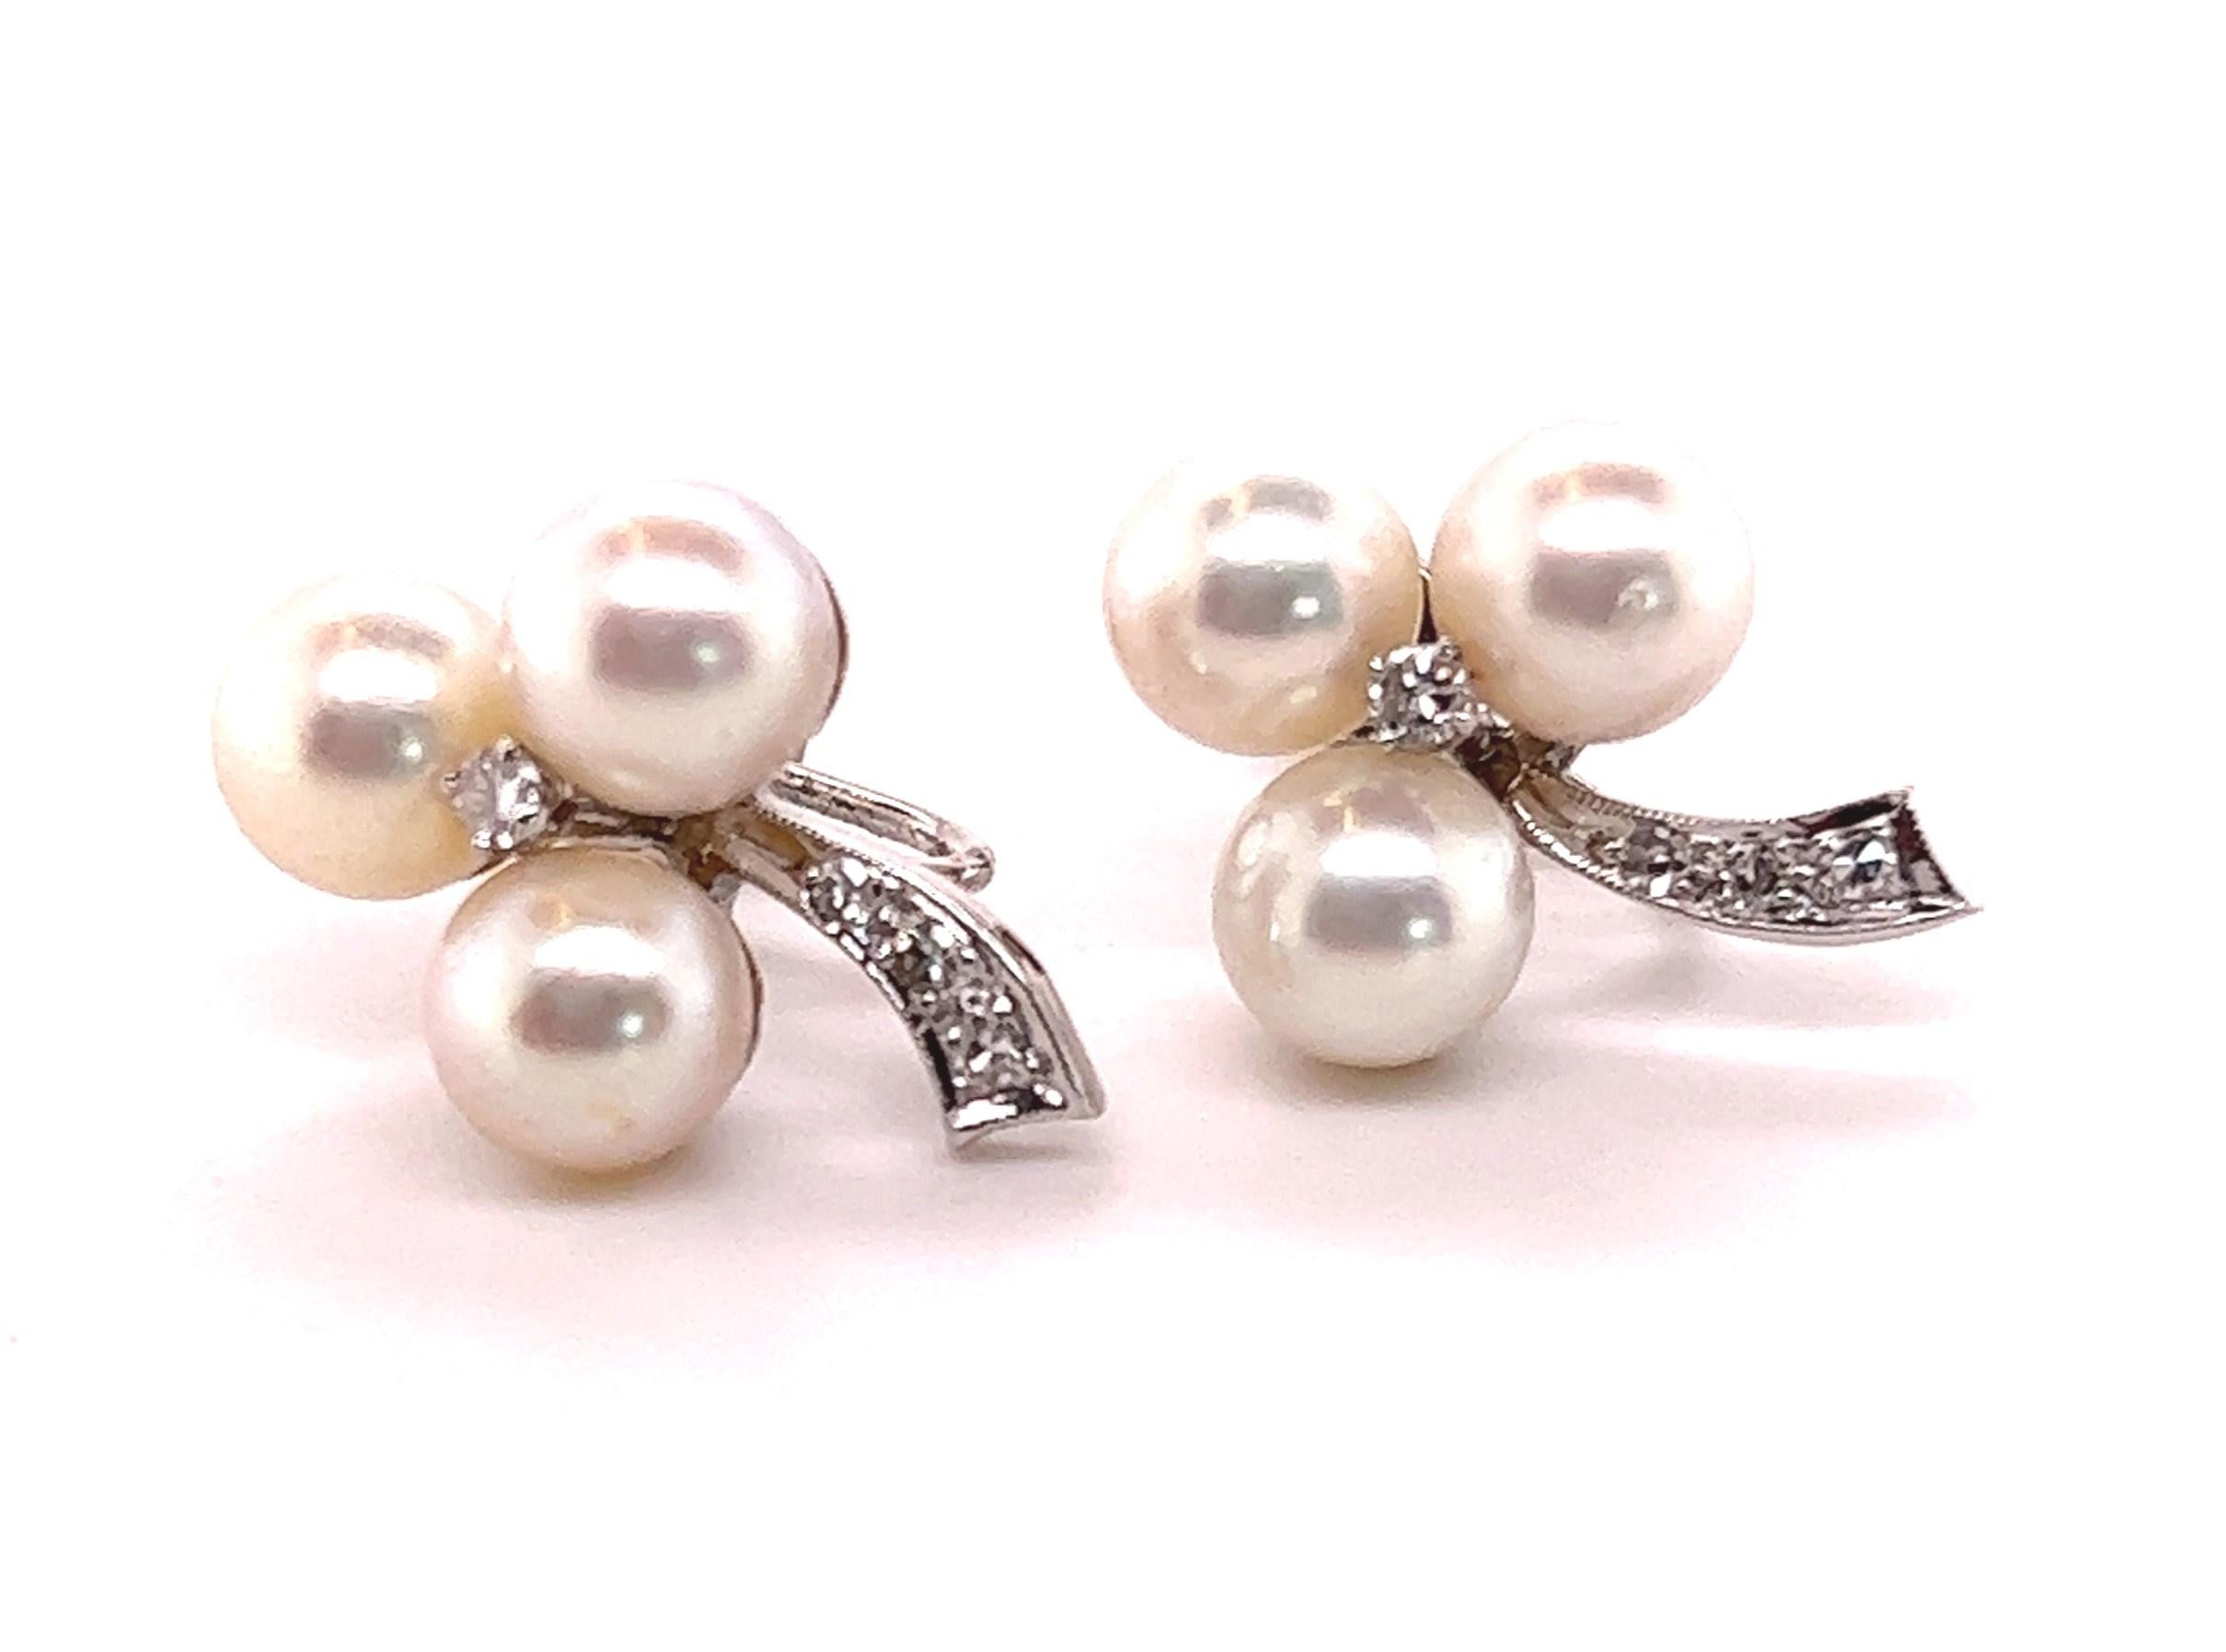 The fabulous 50s is a hit all over again because of the quality and style of the jewelry. There's a reason that this decade's jewelry is sought after- it's timeless and classic. You can add these earrings into your wardrobe and they'll delight you